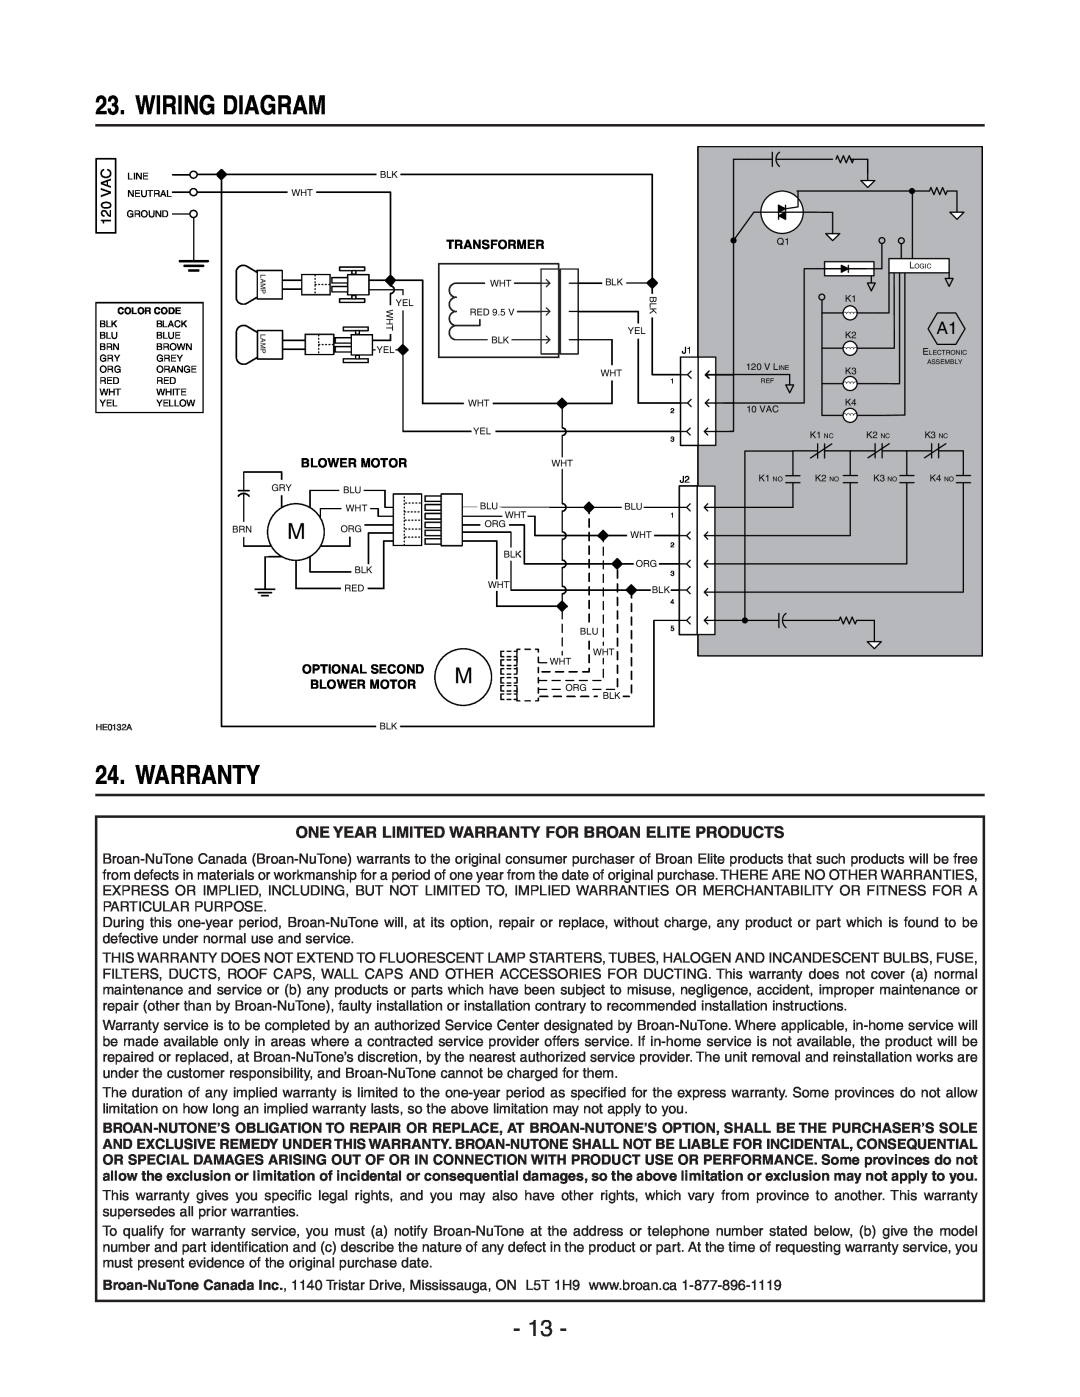 Broan 410, EC62 SERIES, 441, 418, 437 manual Wiring Diagram, One Year Limited Warranty For Broan Elite Products 